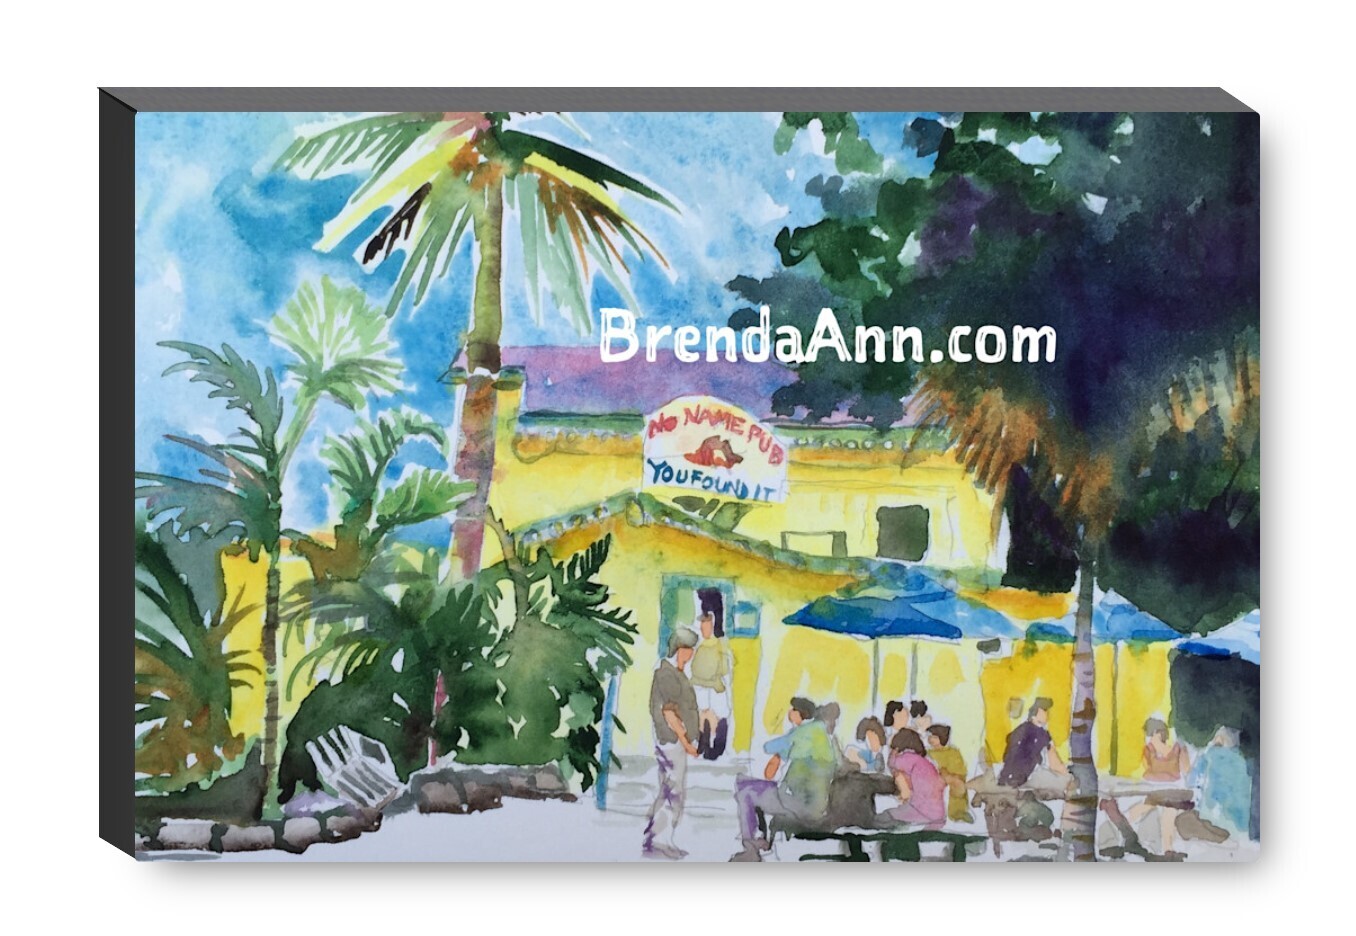 No Name Pub Canvas Gallery Wrapped Print - Watercolor Art - Ready to hang on a wall